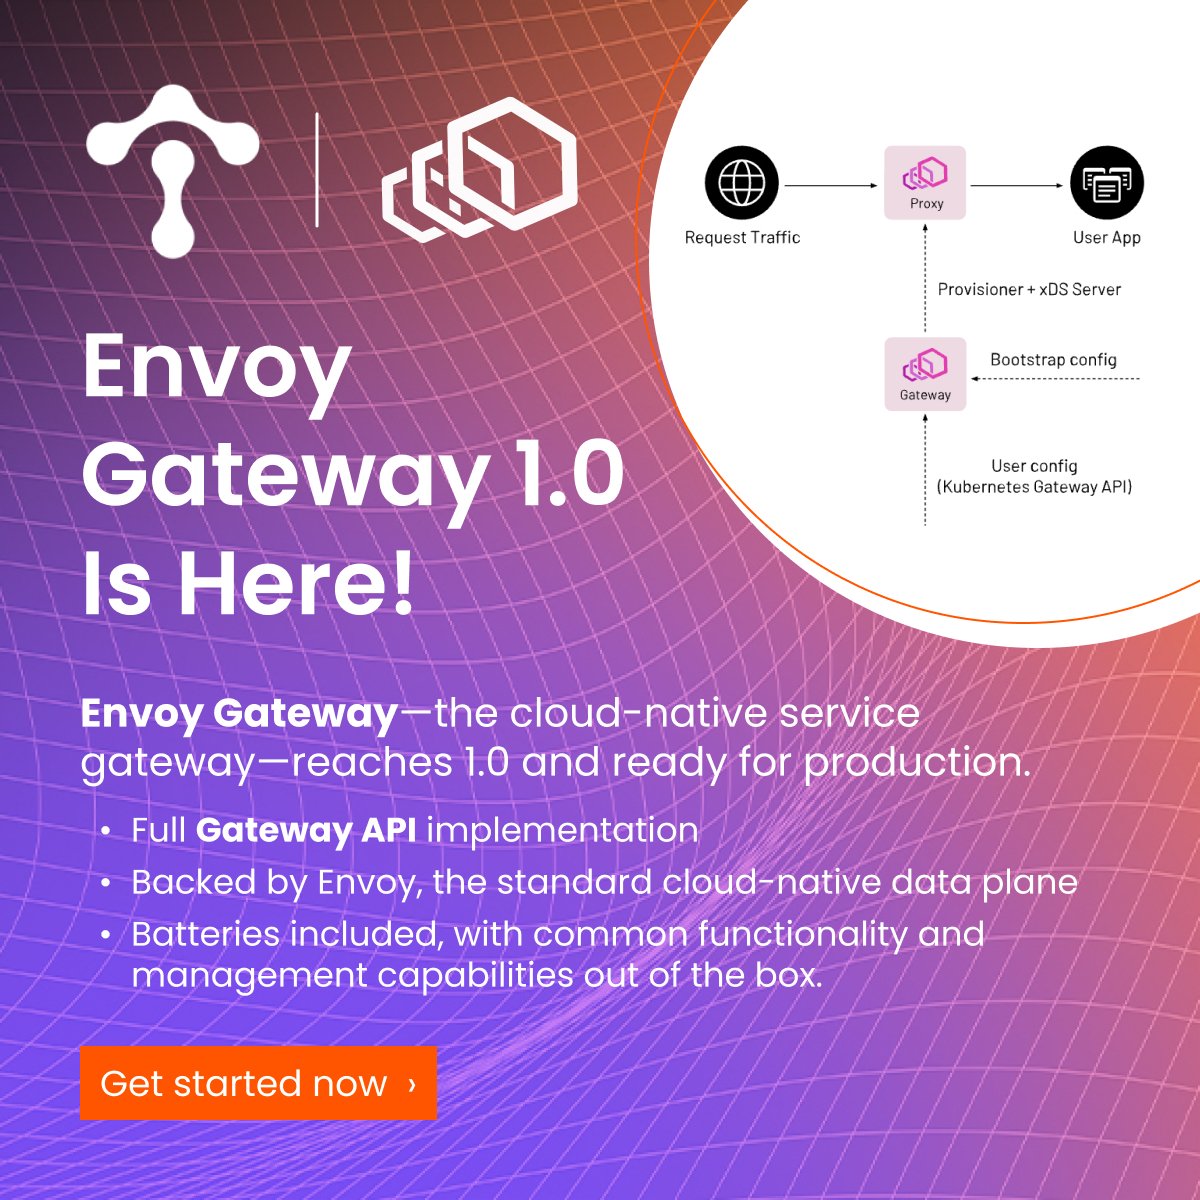 Envoy Gateway 1.0 is here! It's been a wild ride, but the results are stellar. More than 90 contributors and early adopters have taken EG from a bold plan to production ready in 18 mo. Check out the blog and take it for a spin today: tetr8.io/3VuKZJM. #envoygateway